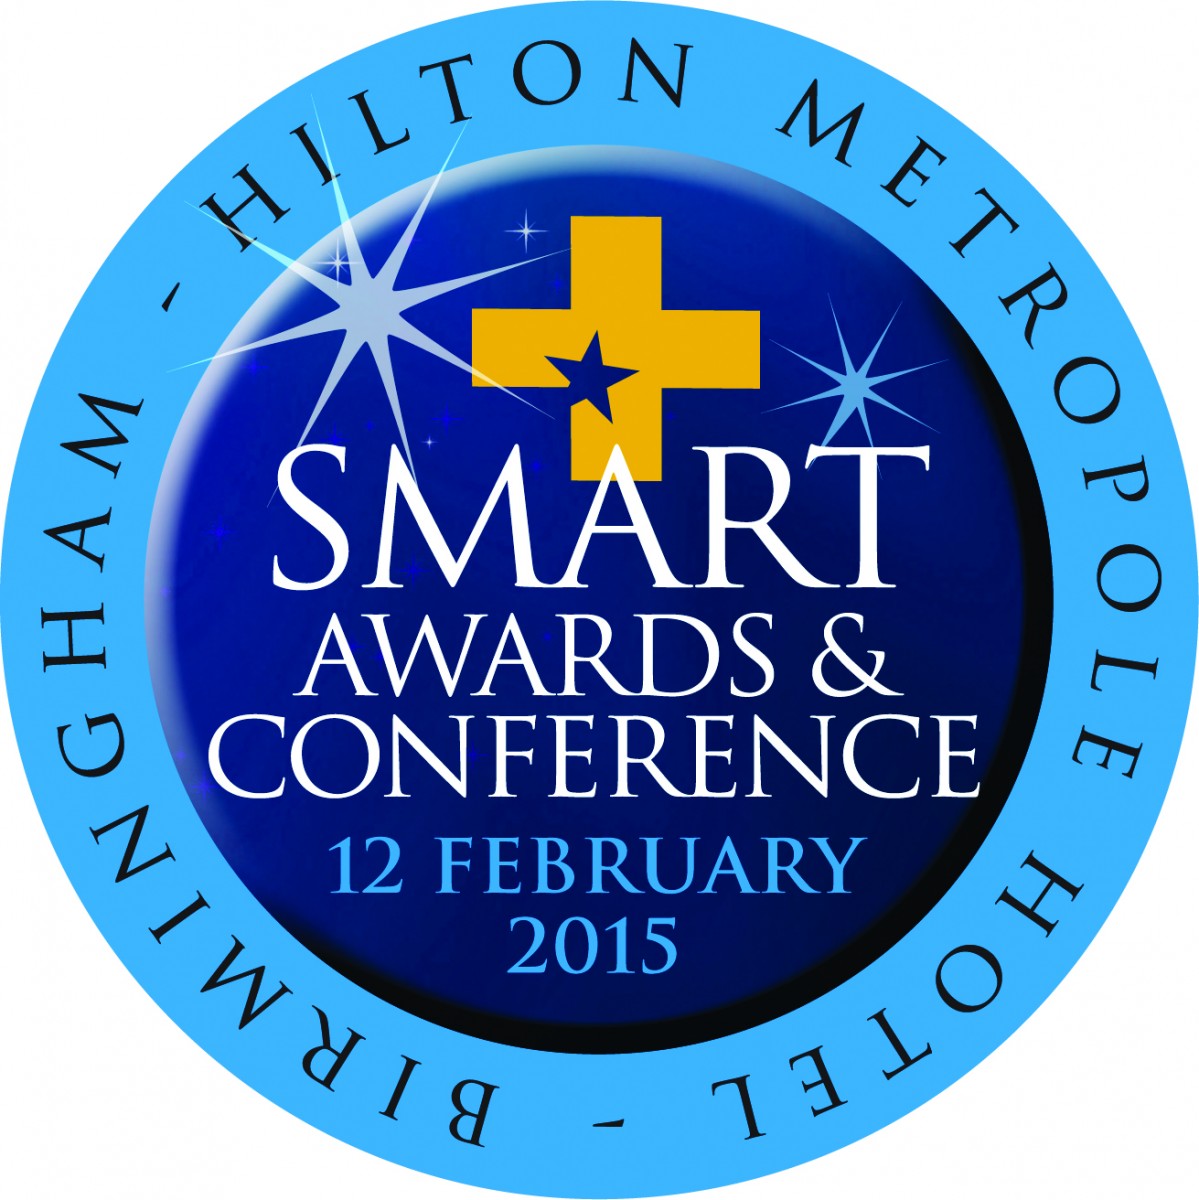 The SMART Awards & Conference